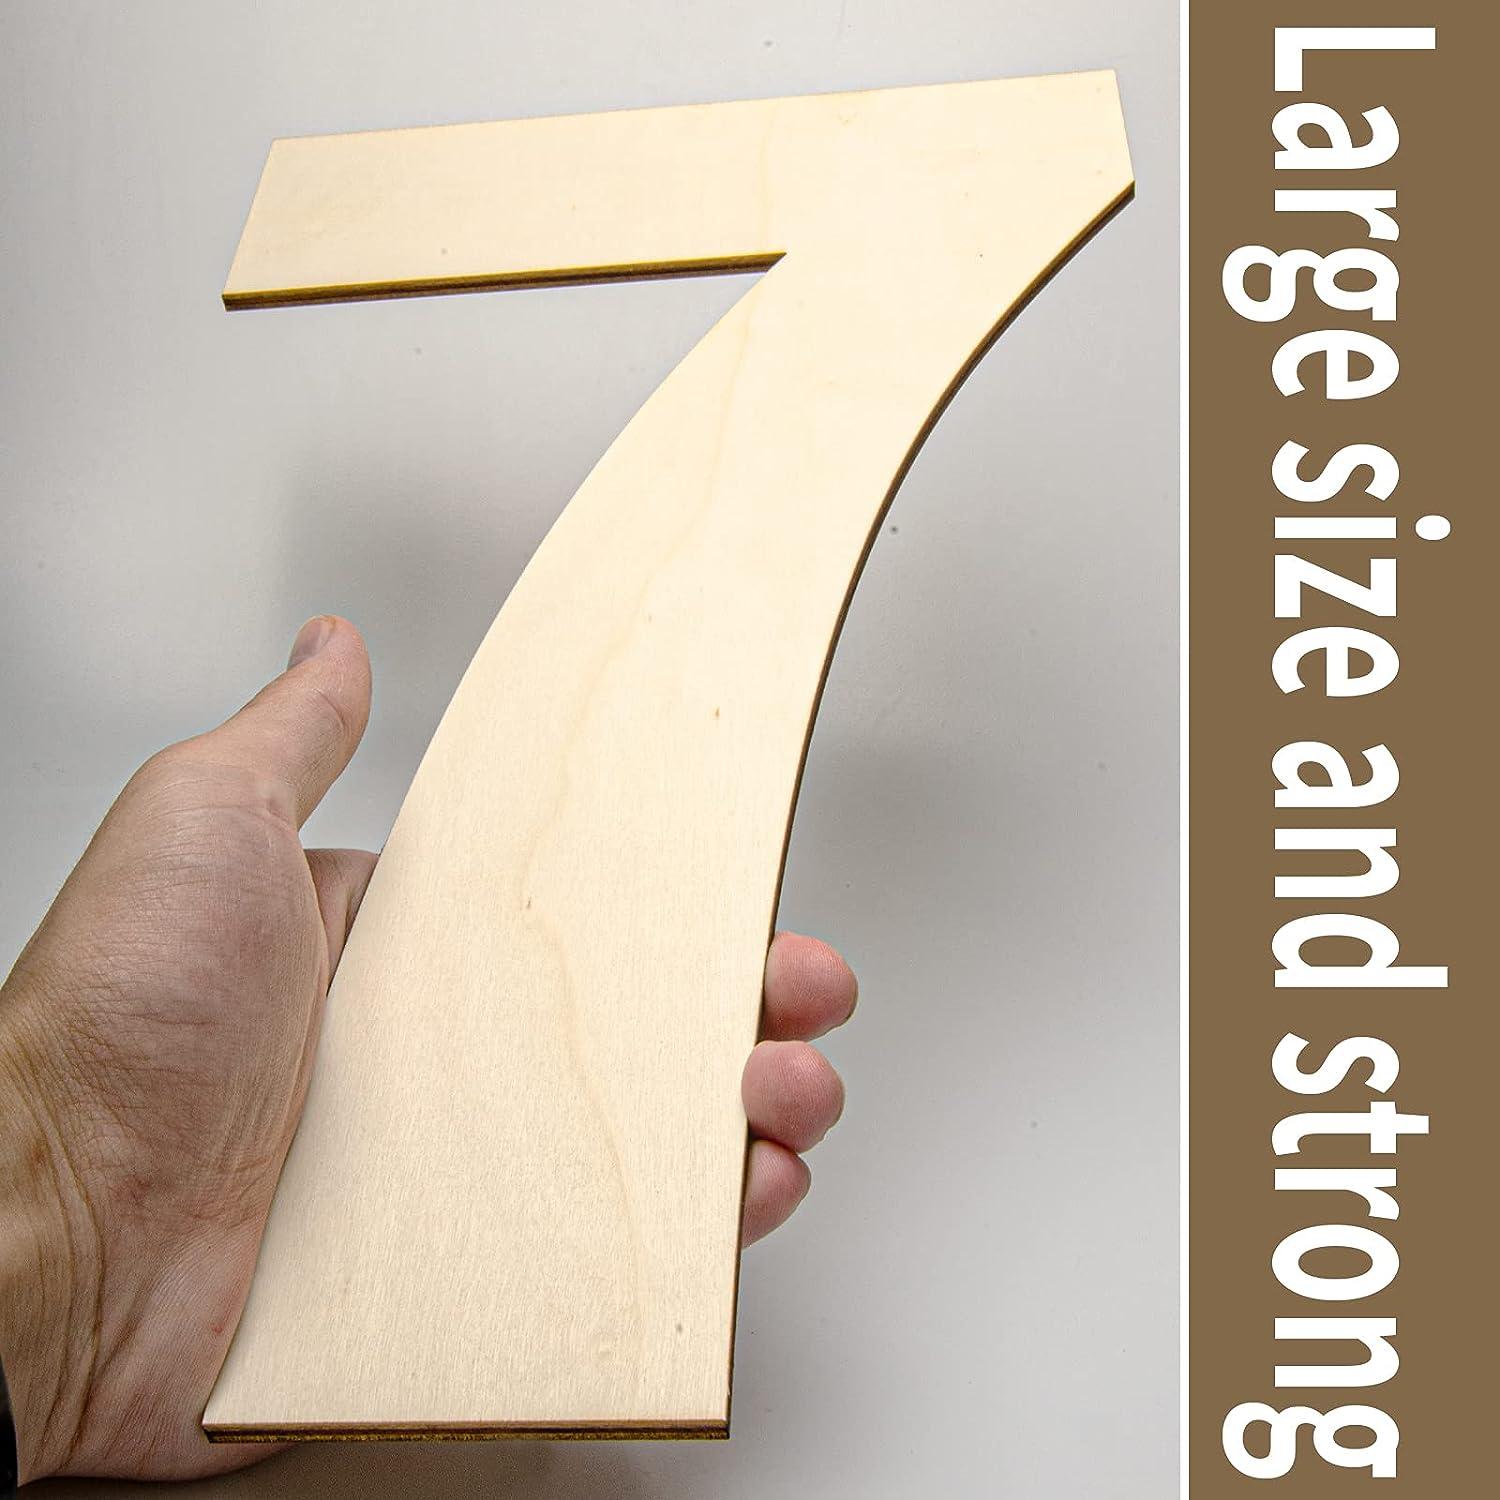 Wooden numbers 1 through 10, diy numbers 1 - 10, unfinished wooden numbers